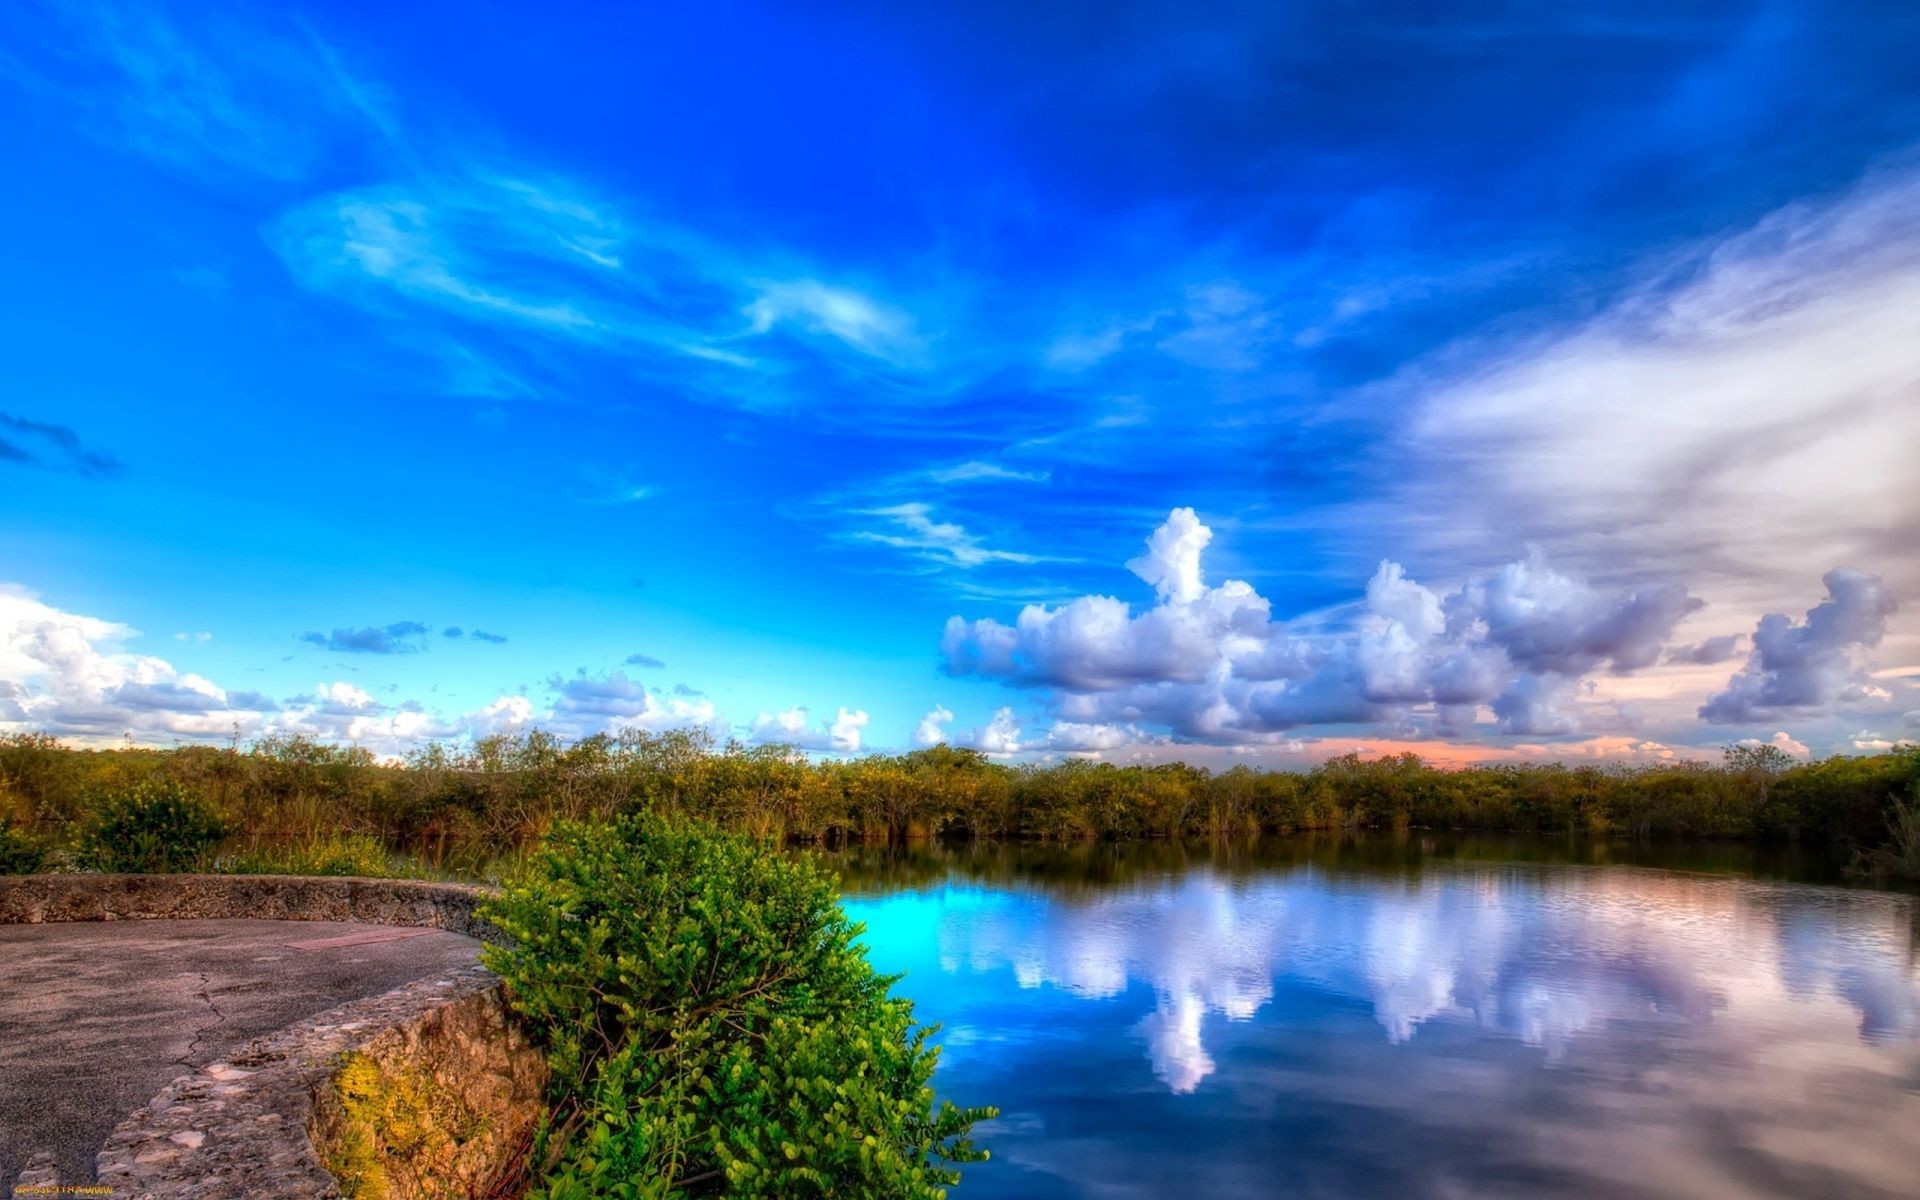 lake water nature sky travel outdoors landscape sunset summer dawn scenic reflection evening dusk fair weather